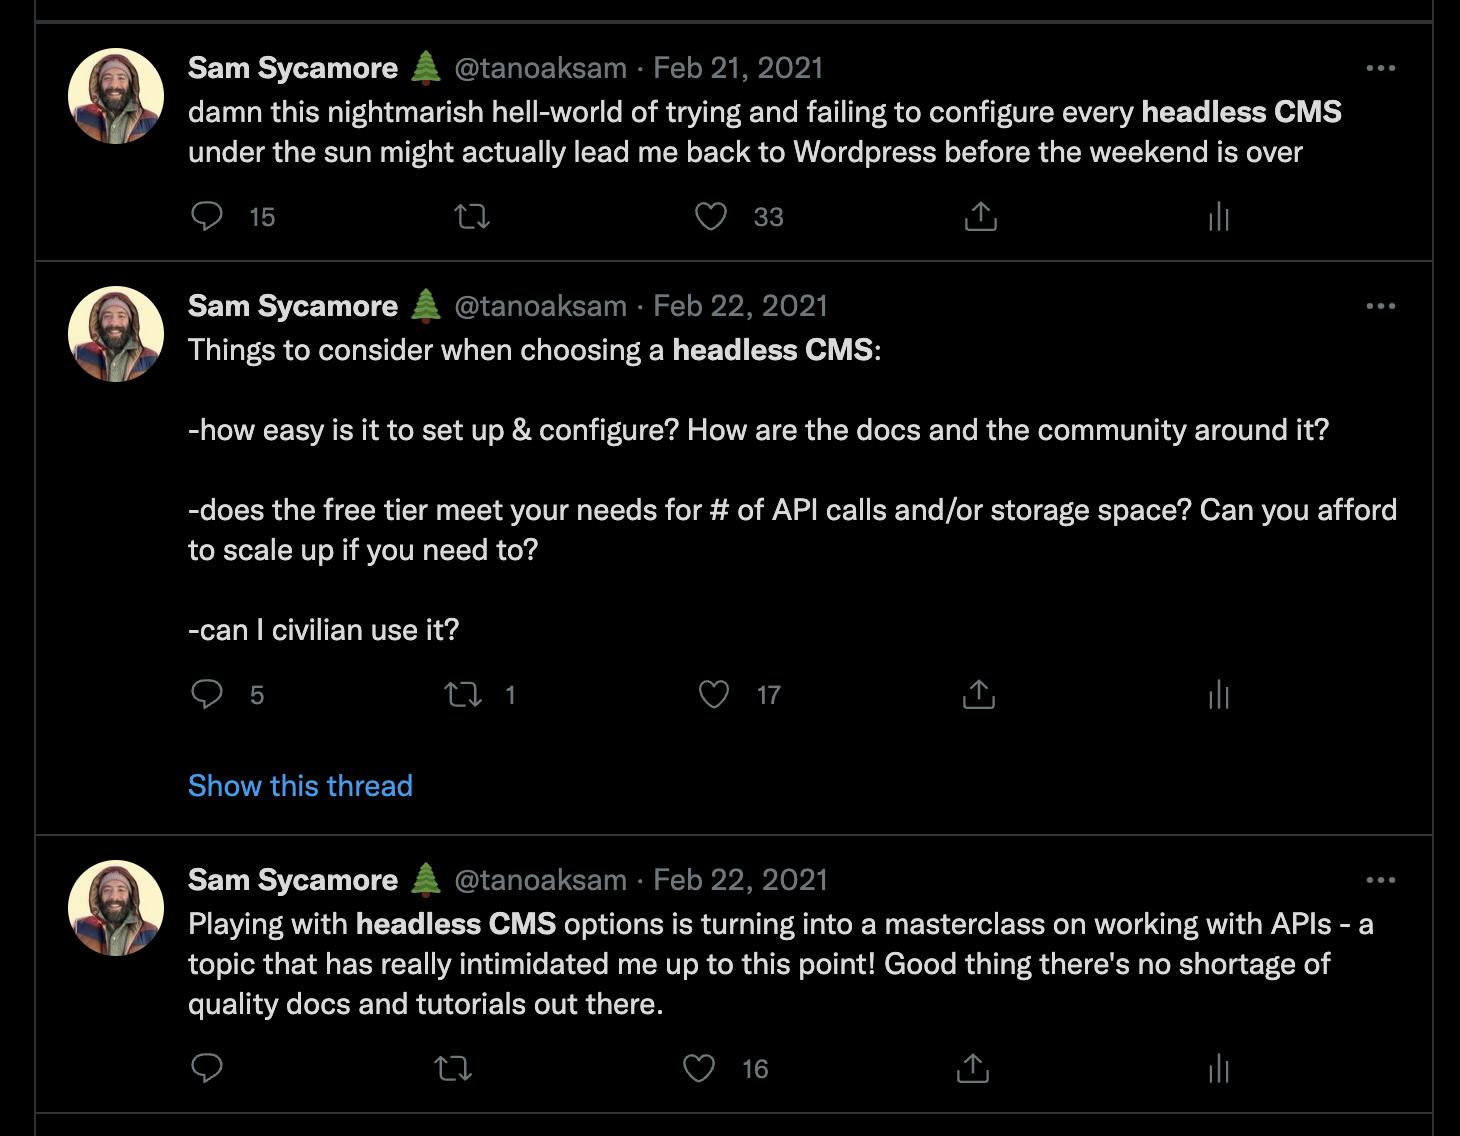 Screen Shot of tweets from tanoaksam on the topic of headless CMS